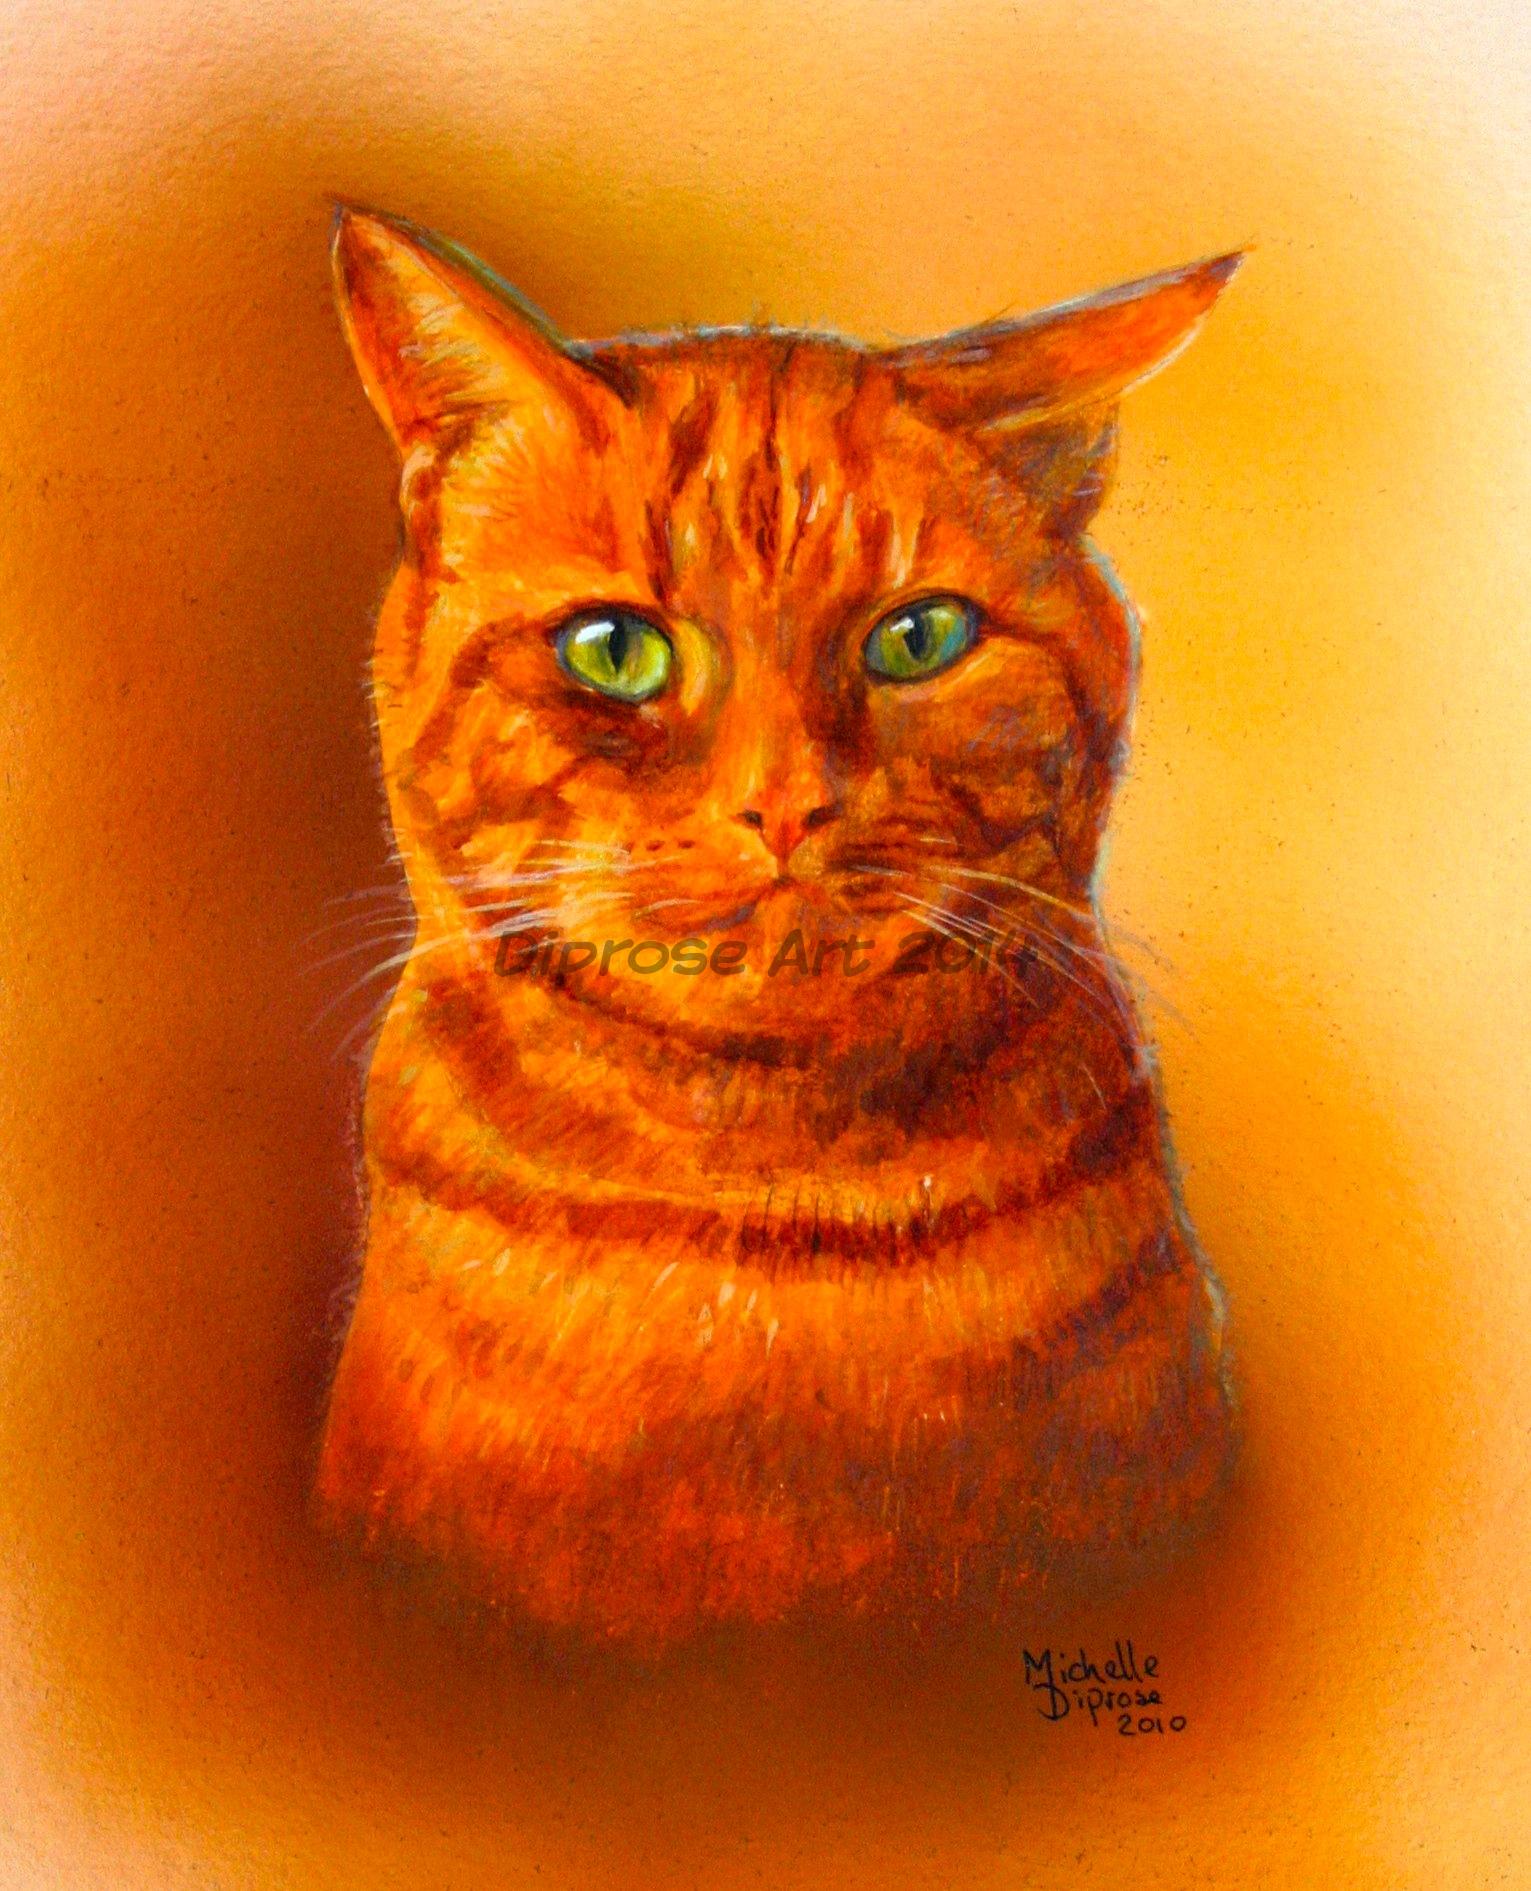 Acrylics on board - approx A4 - pet cat portrait - Tigger is a ginger tom.  Oh yes.  Atitude.  Love him!